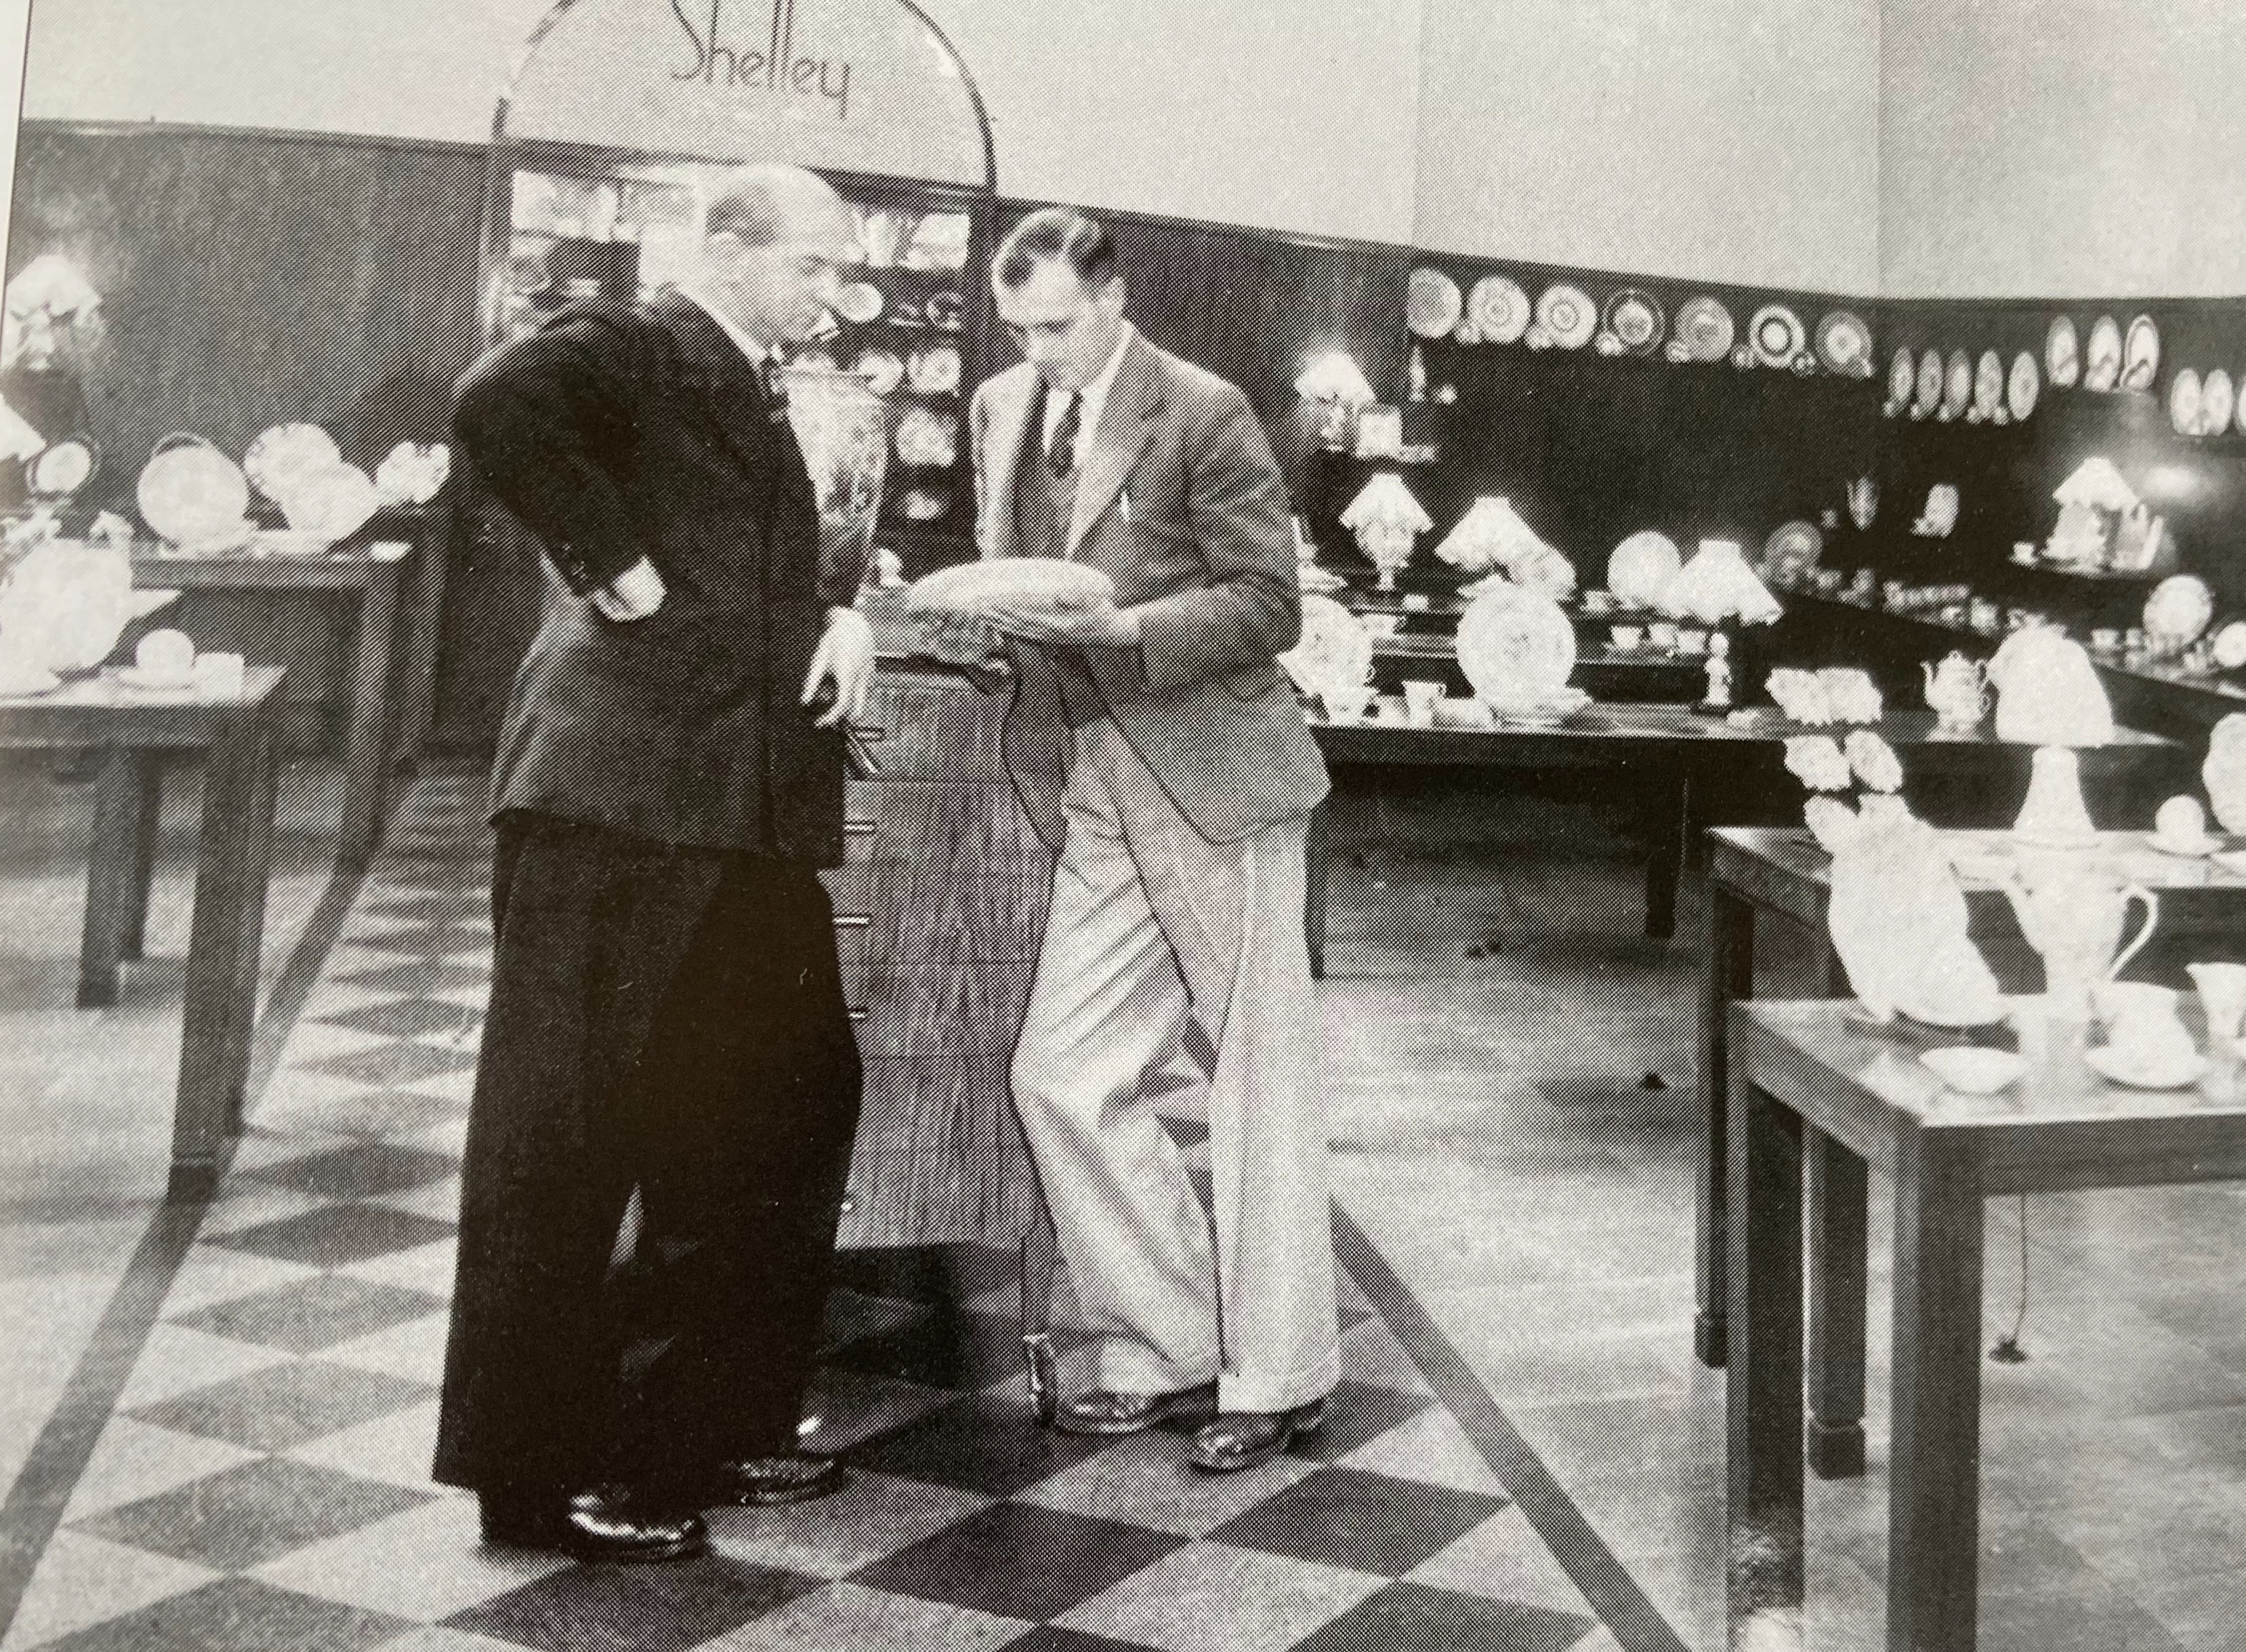 Eric in the Shelley showroom with the Sales Director Ralph Tatton in the late 1940s